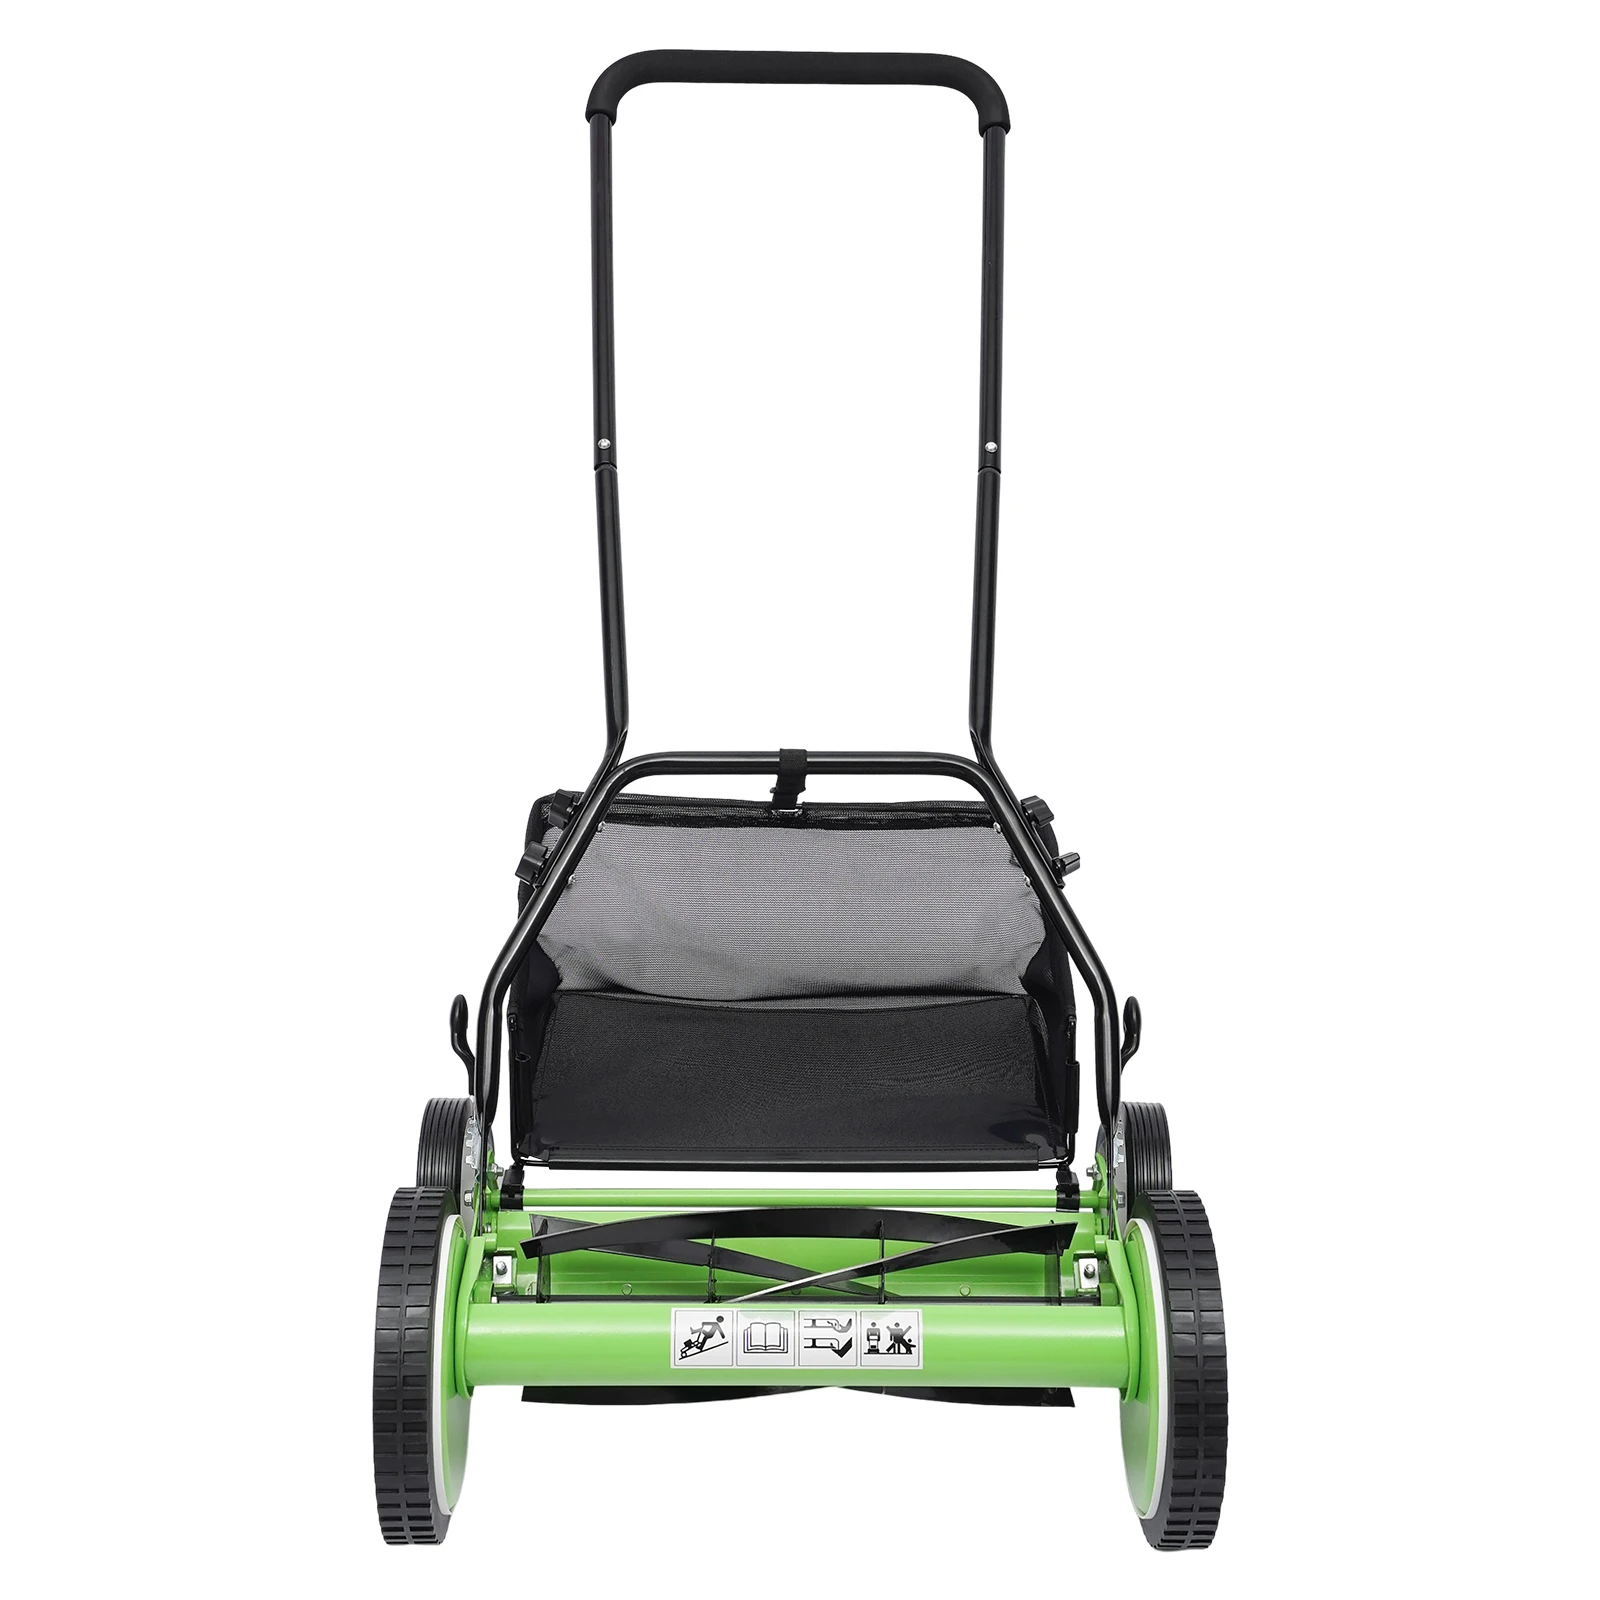 Sharpex Push Manual Lawn Mower with Grass Catcher | 16-Inch Reel Lawn Mower  with 5-Position Height Adjustment | Classic Push Grass Cutter Machine for